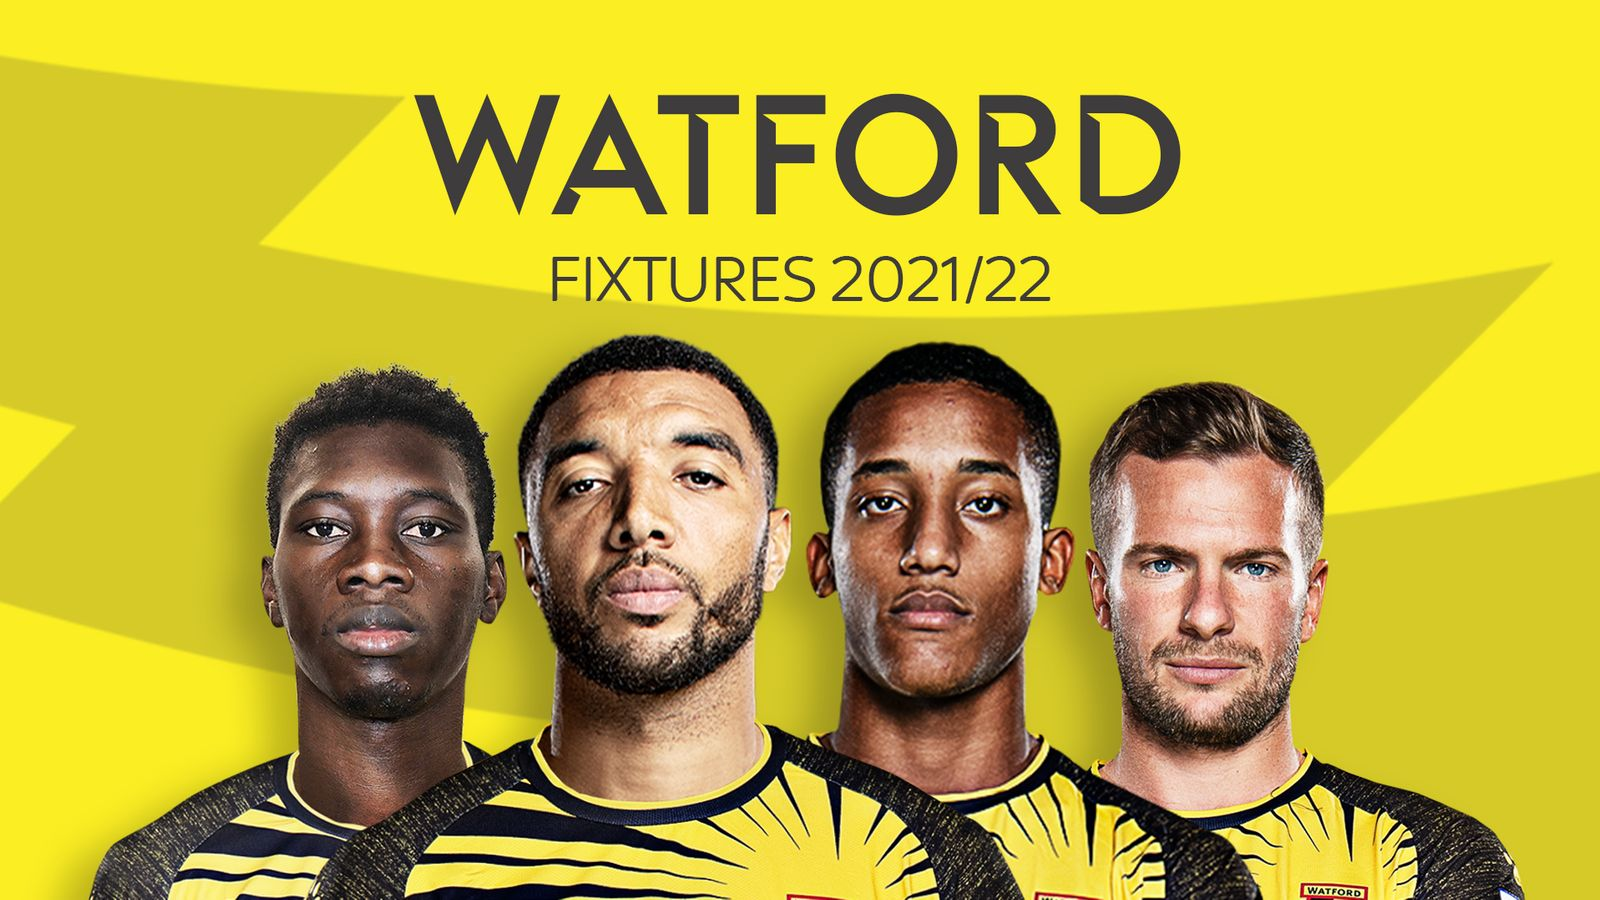 Watford Premier League 2021-22: Fixtures and Match Schedules in Full